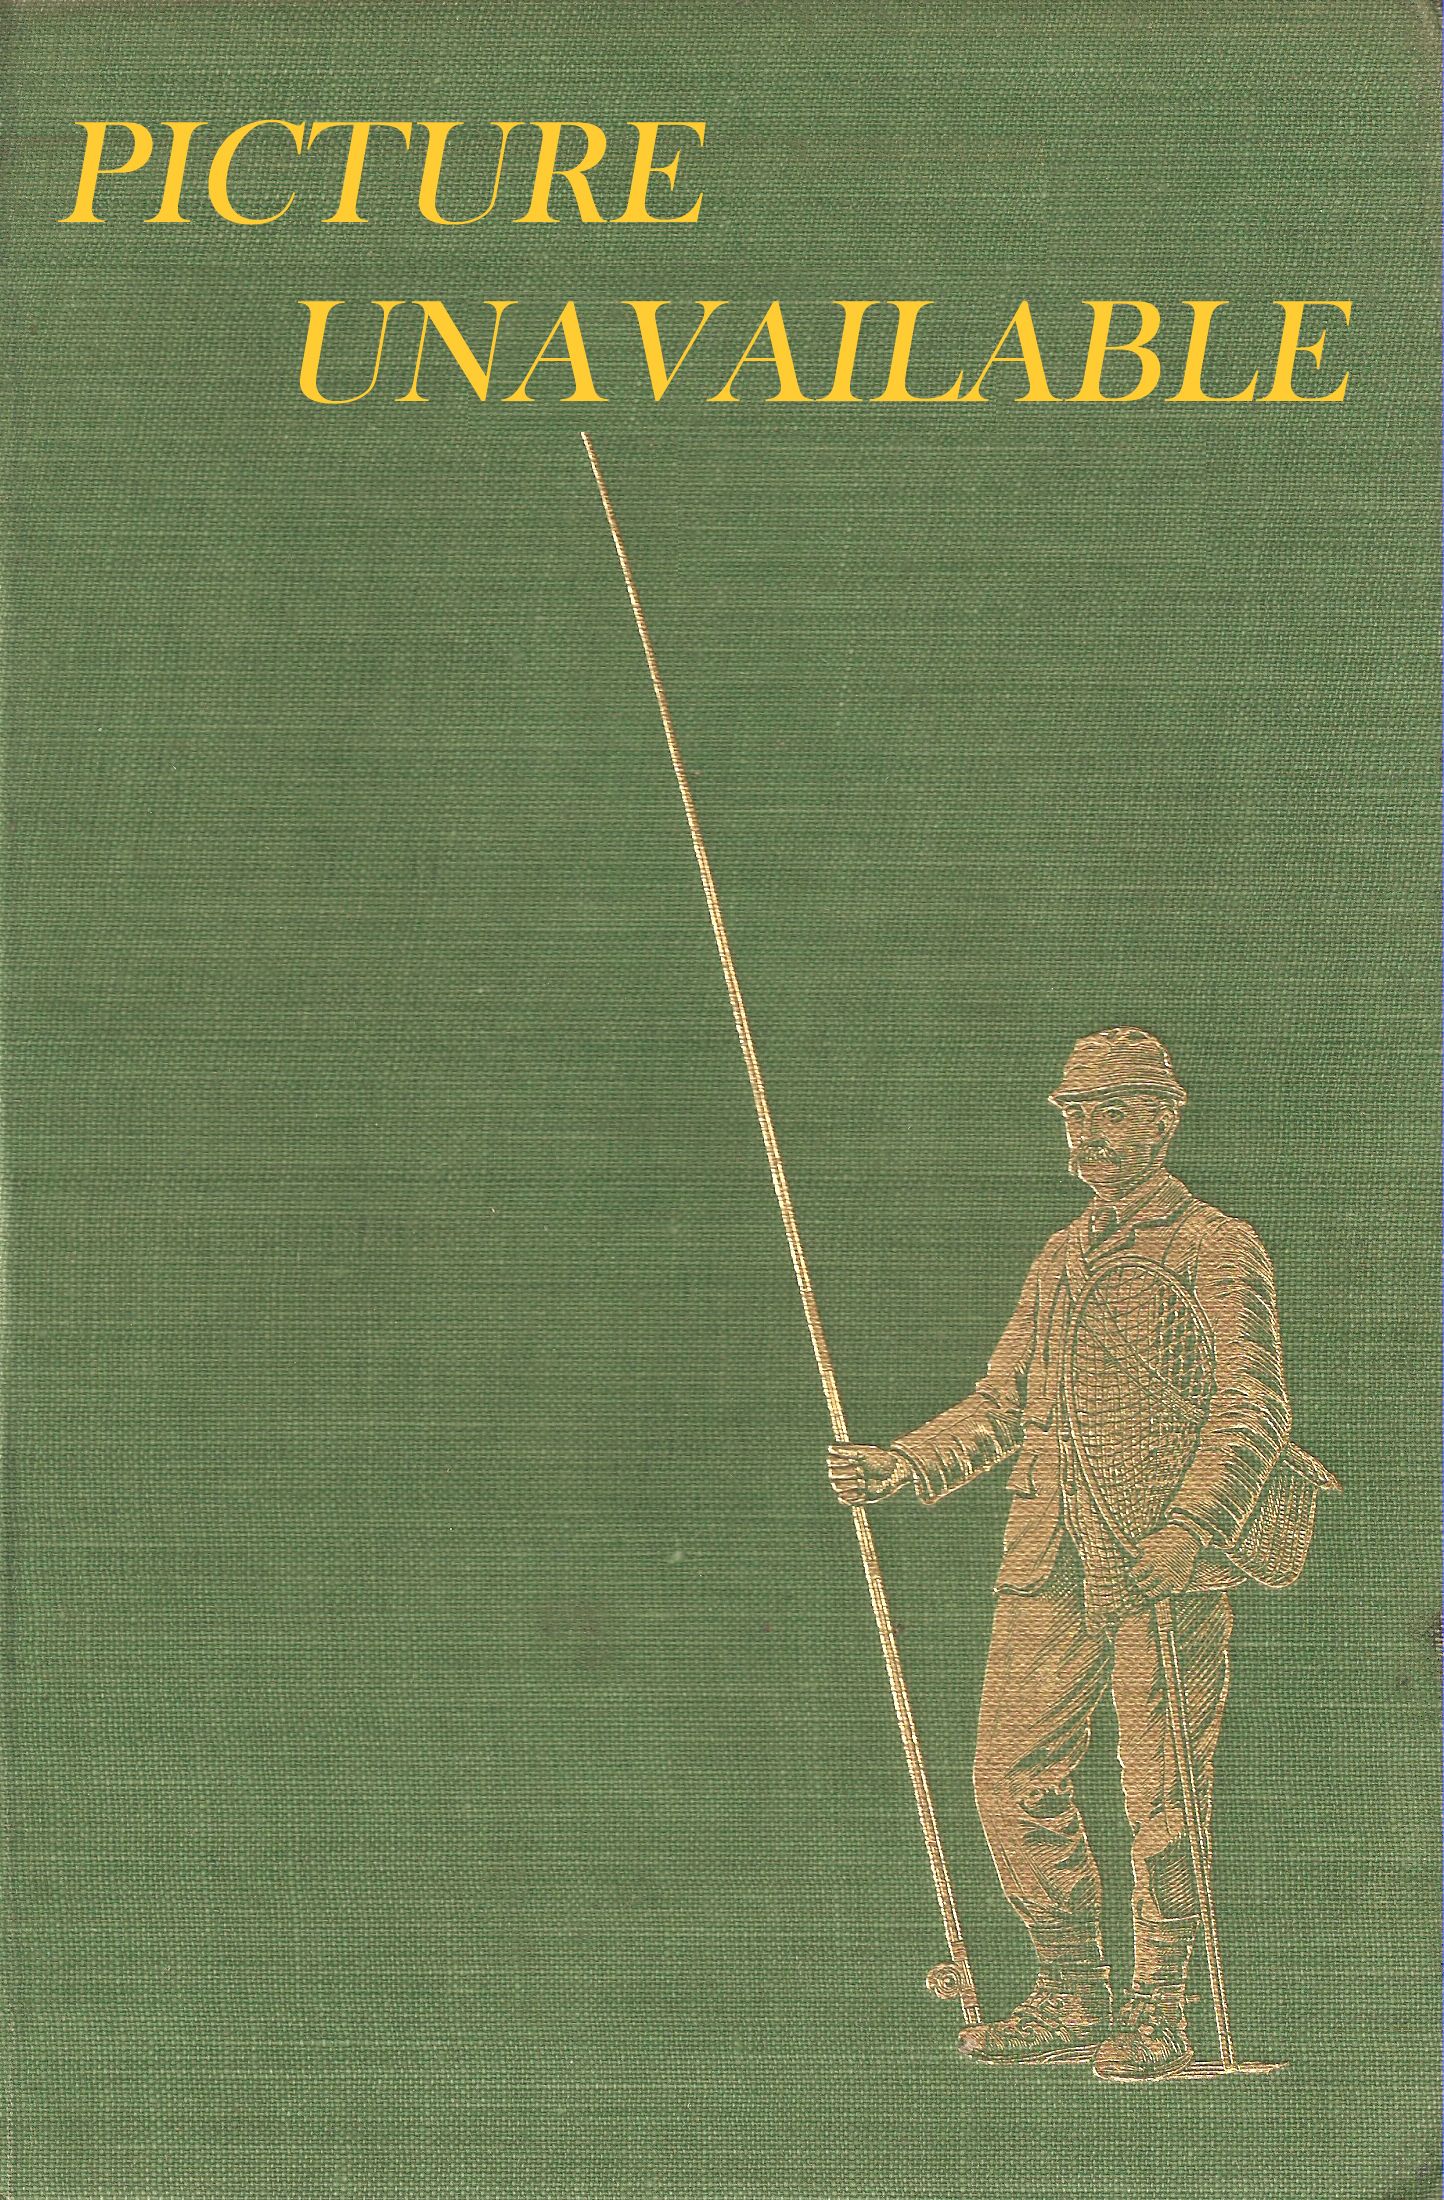 FISHING TACKLE: MODERN IMPROVEMENTS IN ANGLING GEAR, WITH INSTRUCTIONS ON TACKLE-MAKING FOR THE AMATEUR. With an additional chapter on tackle repairing by Richard Clapham. By W.L. Foster.